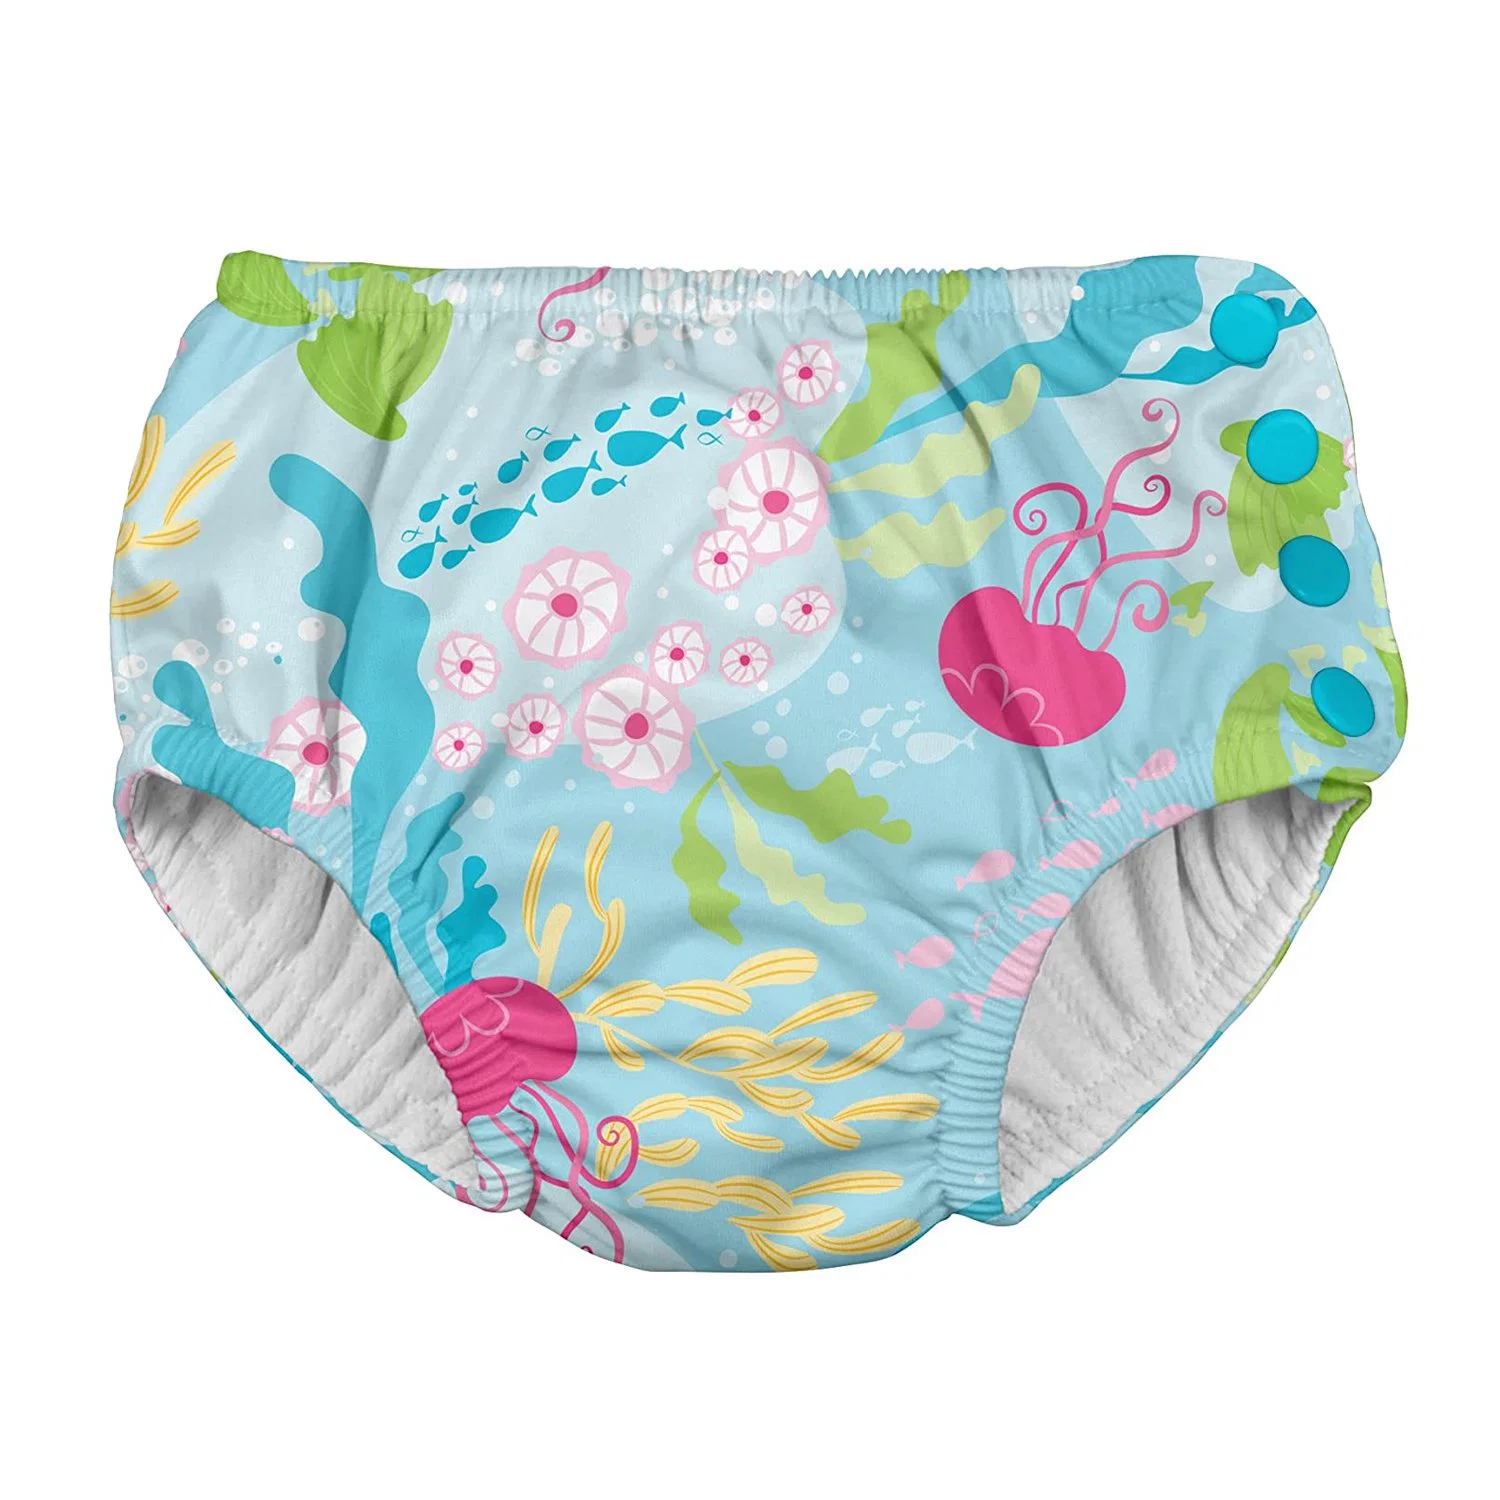 Reusable & Adjustable Baby Shower Gifts Swimming Pants